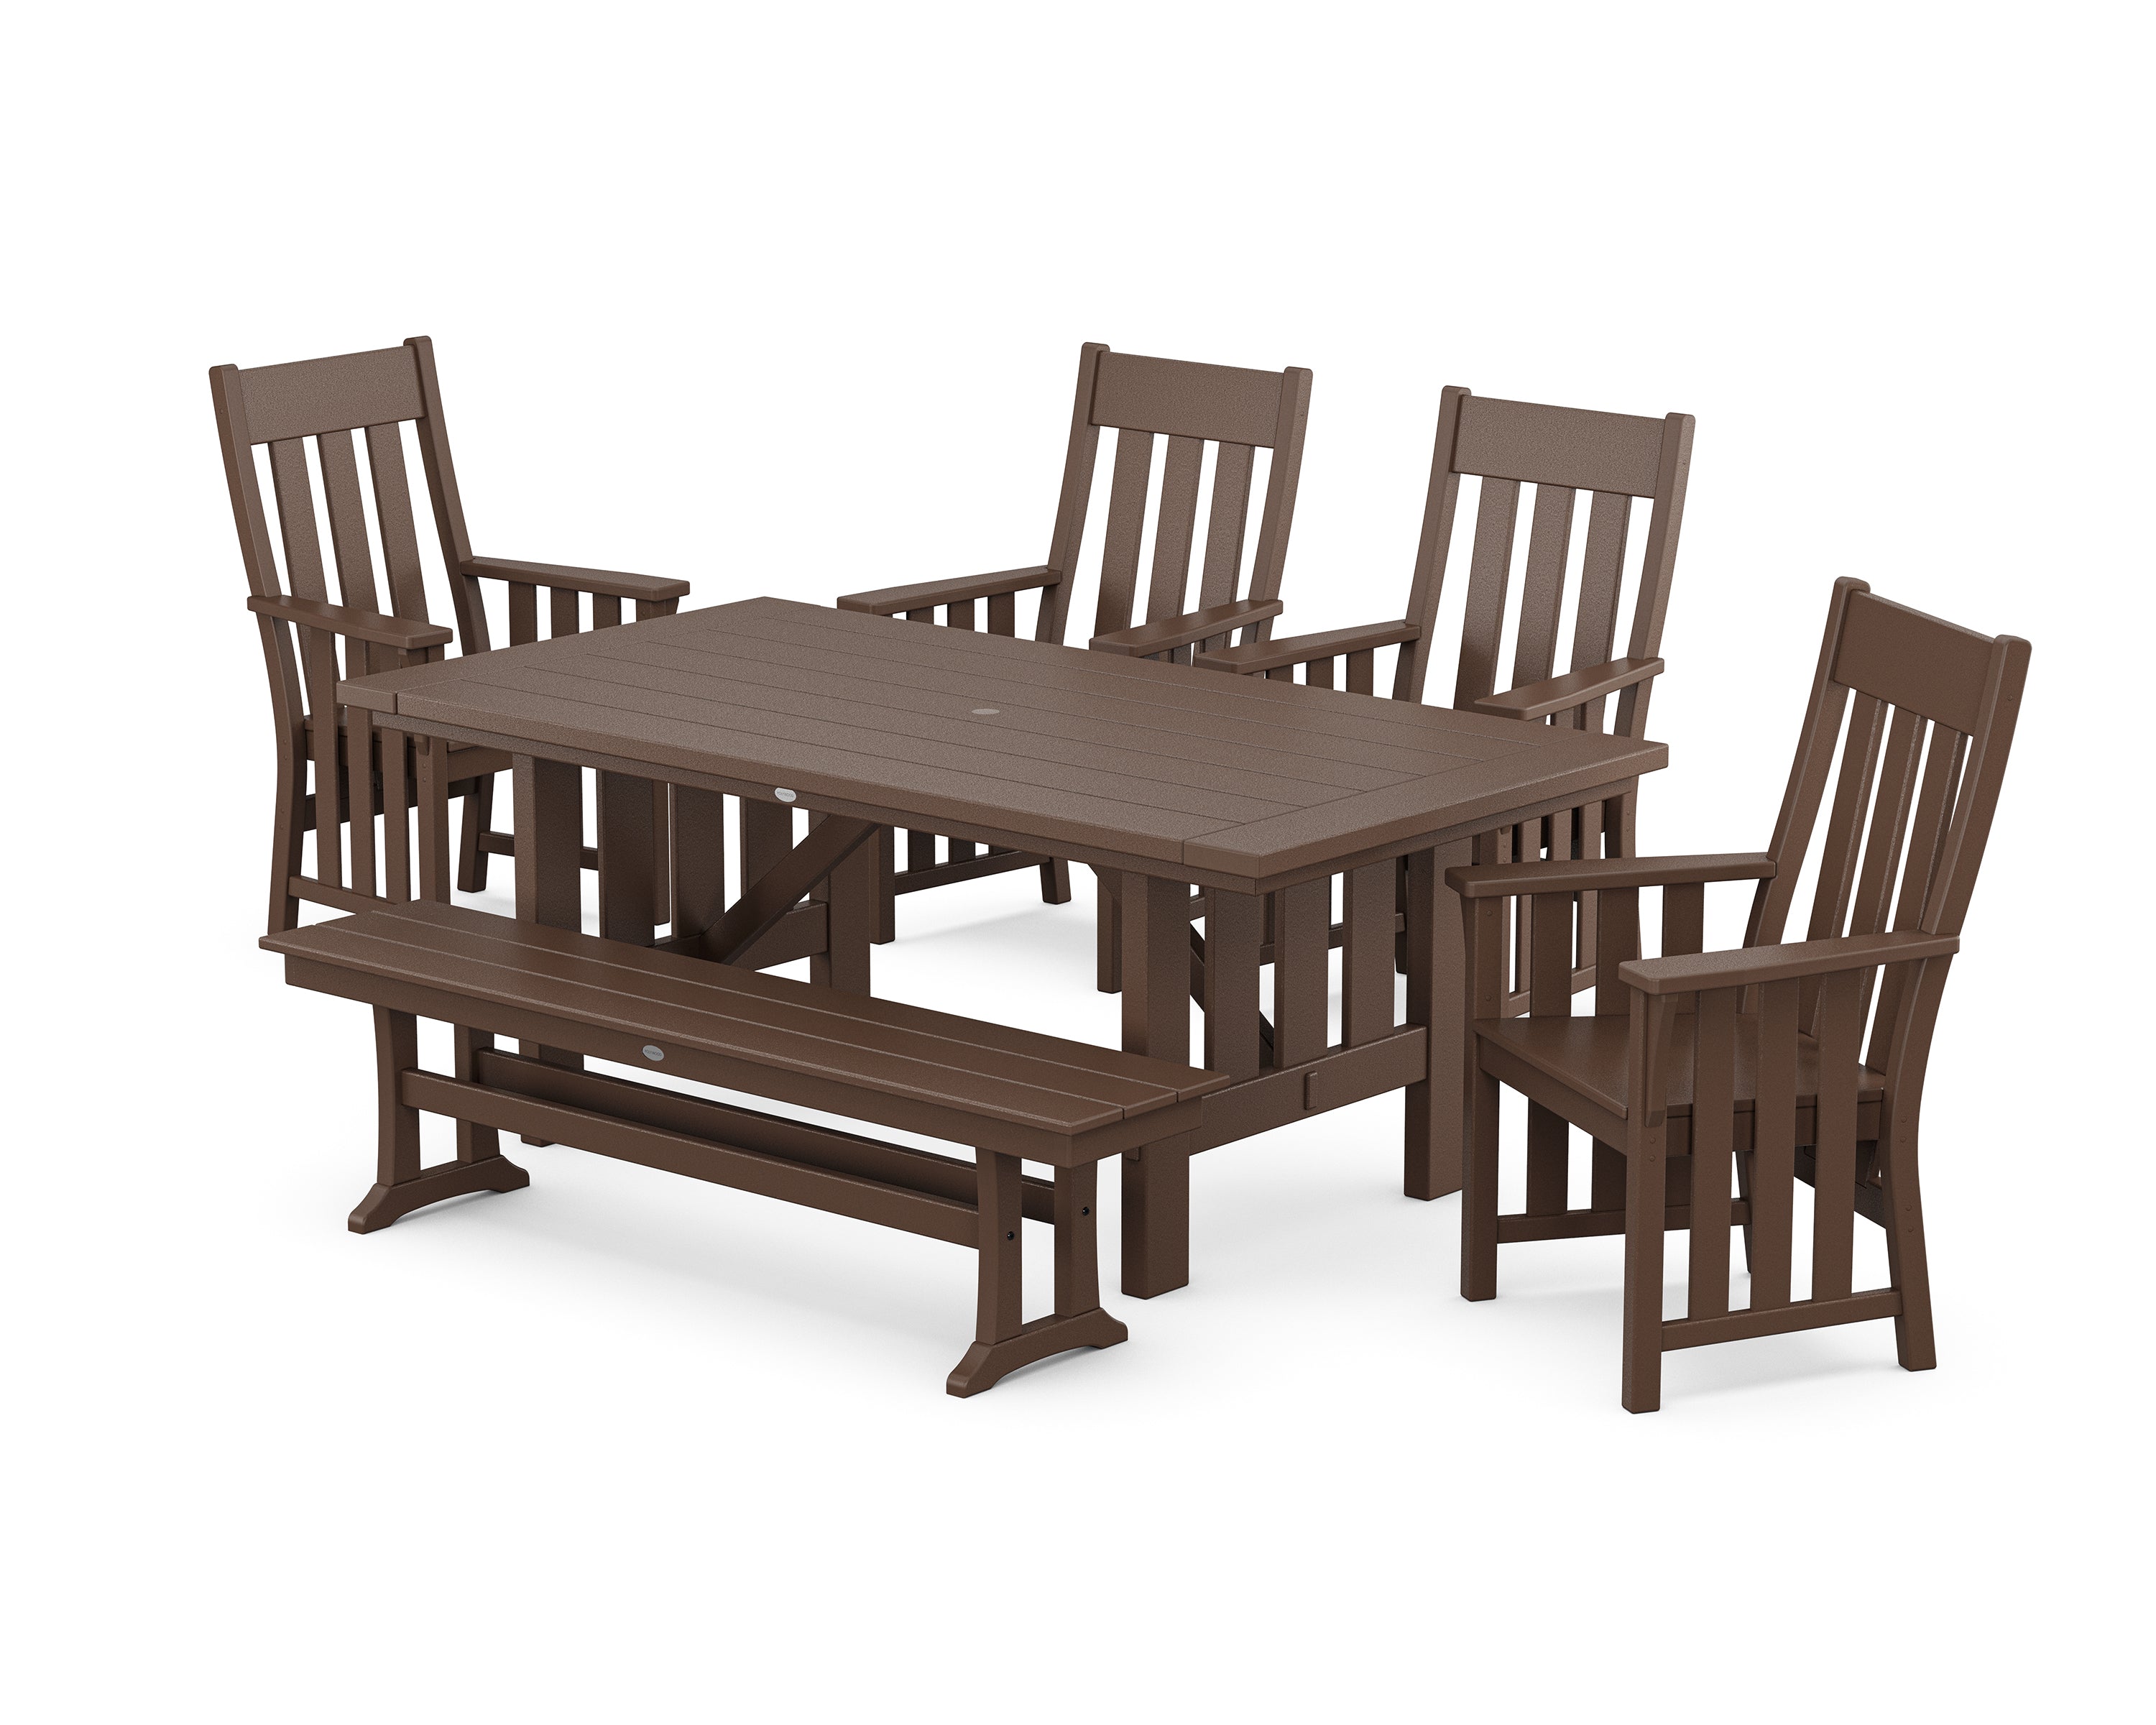 Martha Stewart by POLYWOOD® Acadia 6-Piece Dining Set with Bench in Mahogany